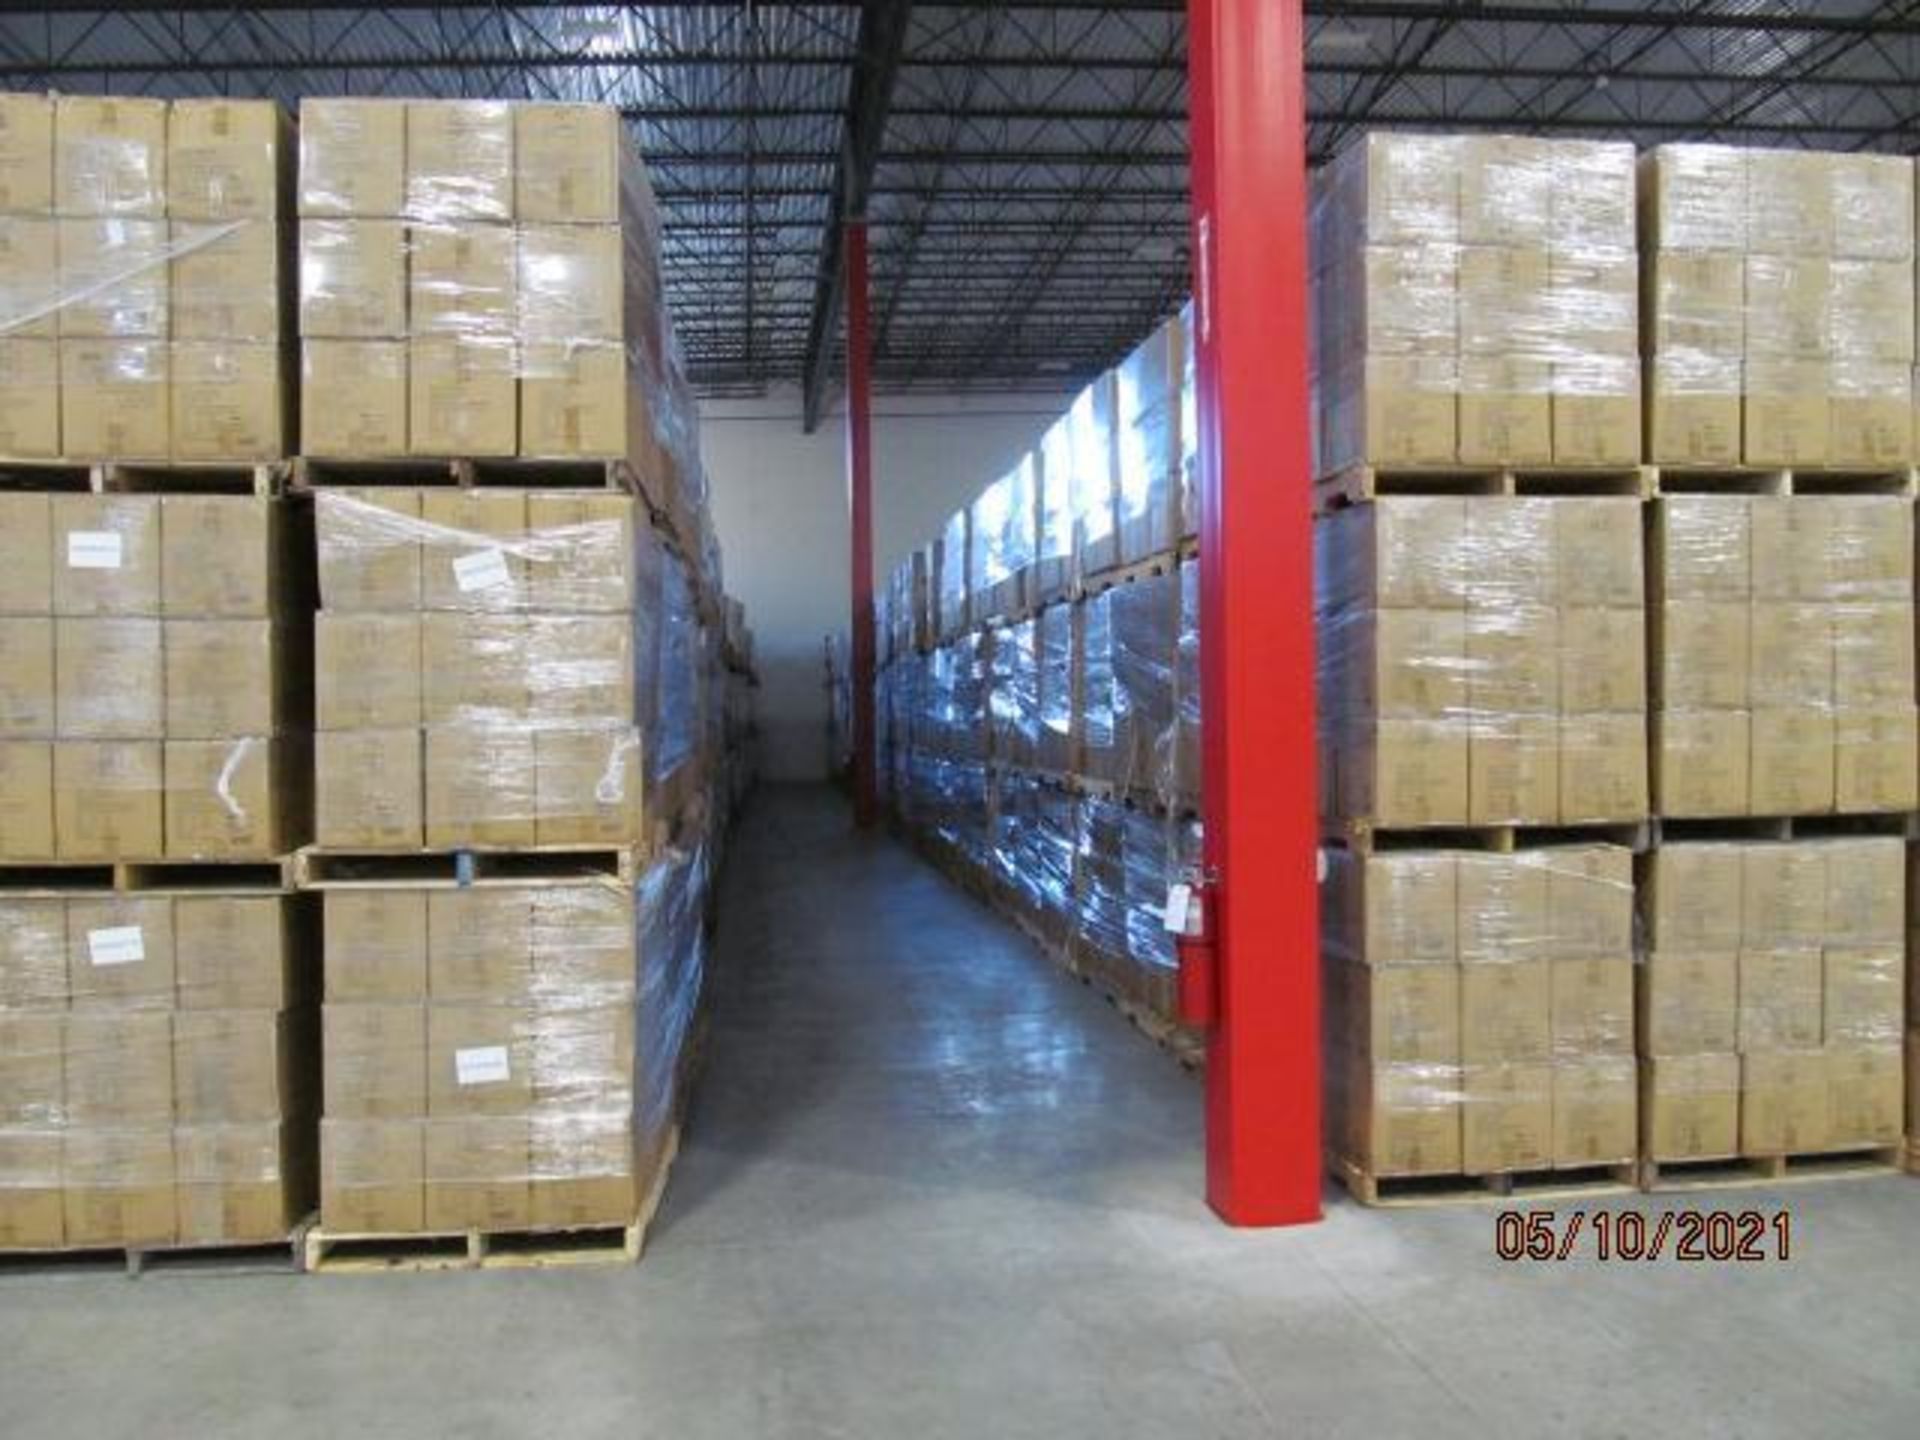 Lot of Waxman Kleen Freak Sanitizing Wipes consisting of 29,027 packages on 45 pallets. Each package - Image 9 of 11